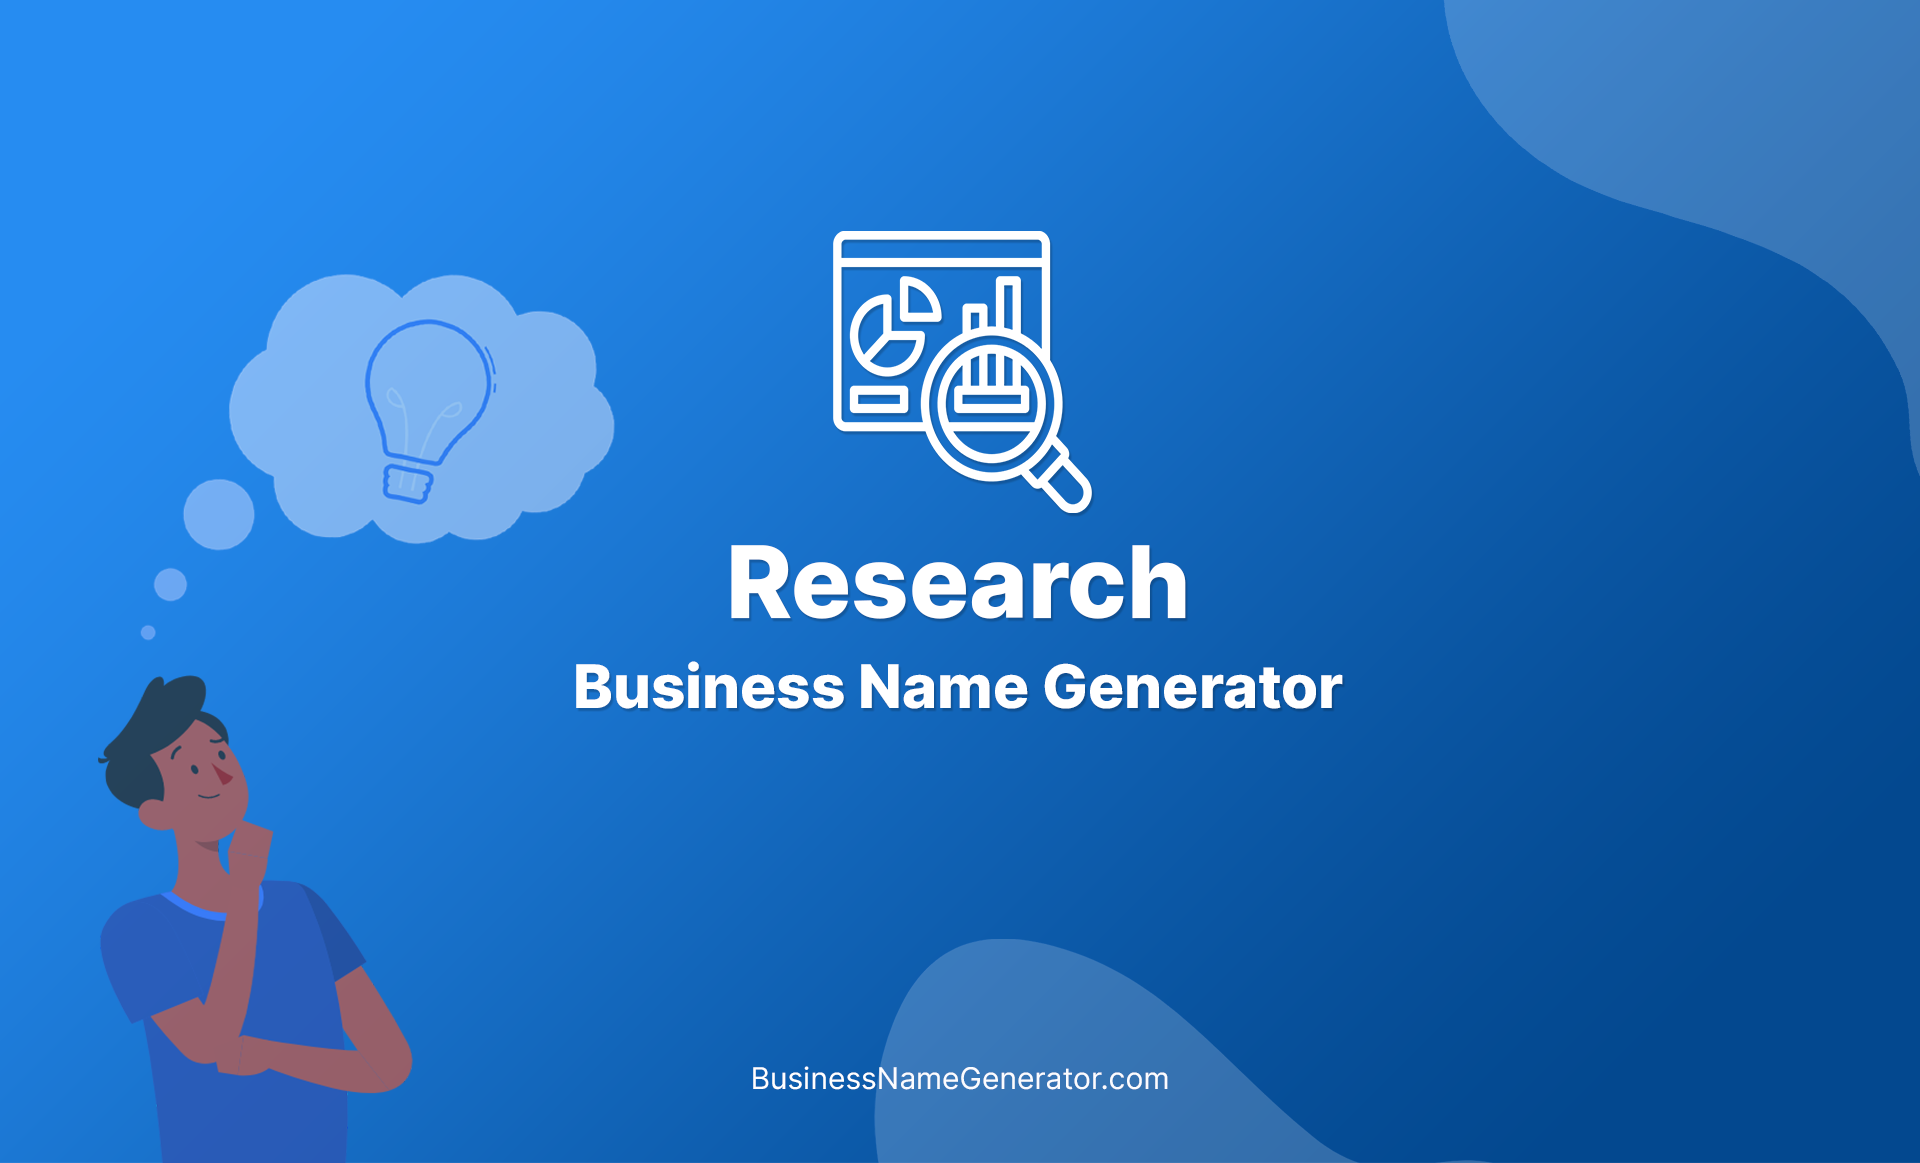 Research Business Name Generator